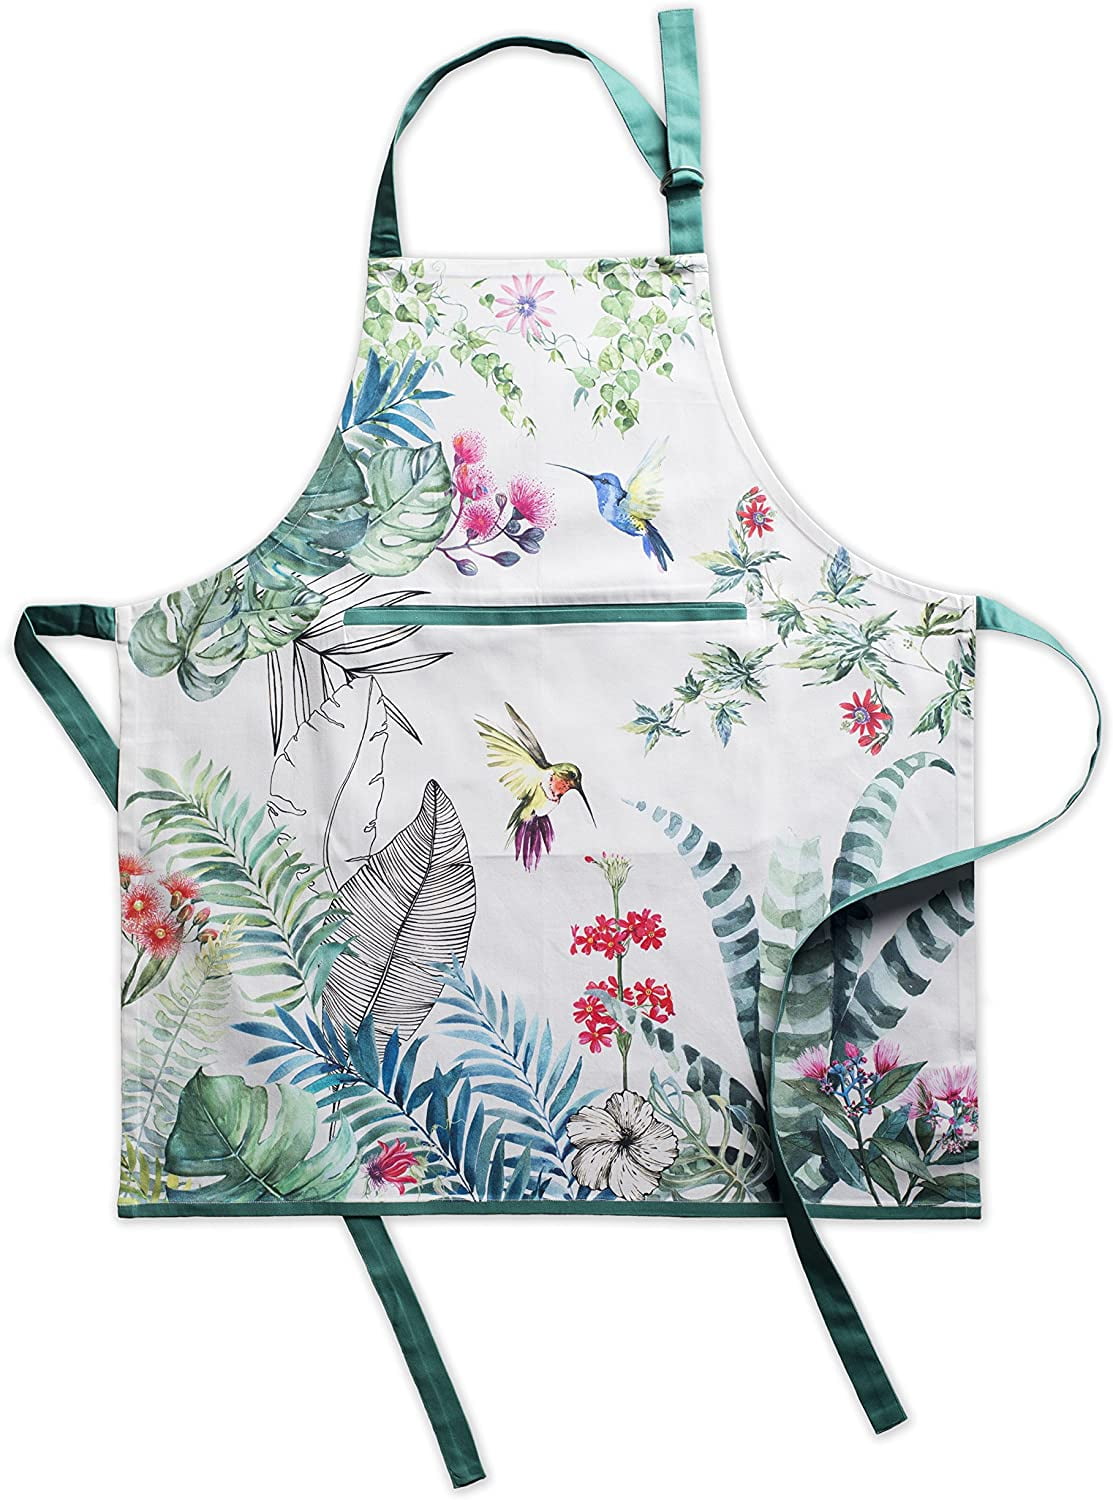 Maison d' Hermine Birdies on Wire 1 Piece 100% Cotton Apron with an Adjustable Neck & Two Side Pockets with Long Ties for Women/Men Chef 27.50x31.50 